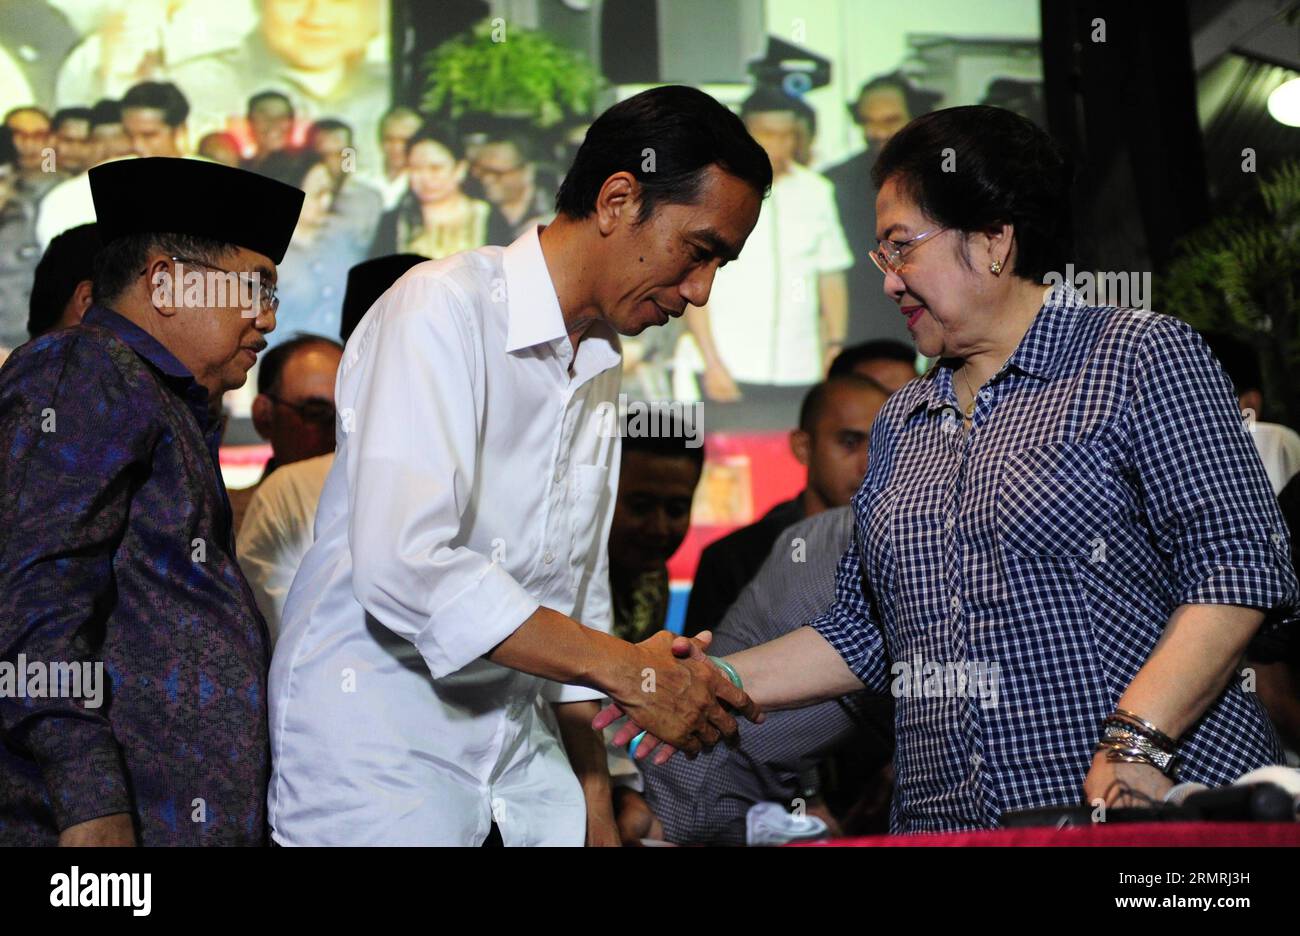 (140722) -- JAKARTA, July 22, 2014 (Xinhua) -- Indonesia s presidential candidate from the Indonesian Democratic Party of Struggle (PDIP) Joko Widodo (C) shakes hands with the party s Chairperson Megawati Soekarnoputri (R), accompanied by his running mate Jusuf Kalla (L) after a press conference ahead of announcement of recapitulation 2014 presidential election in Jakarta, Indonesia, July 22, 2014. The General Election Commission (KPU) is scheduled to release the vote tally results this afternoon, qualifying the winner of election. (Xinhua/Zulkarnain) (lmz) INDONESIA-JAKARTA-PRESIDENT ELECTION Stock Photo